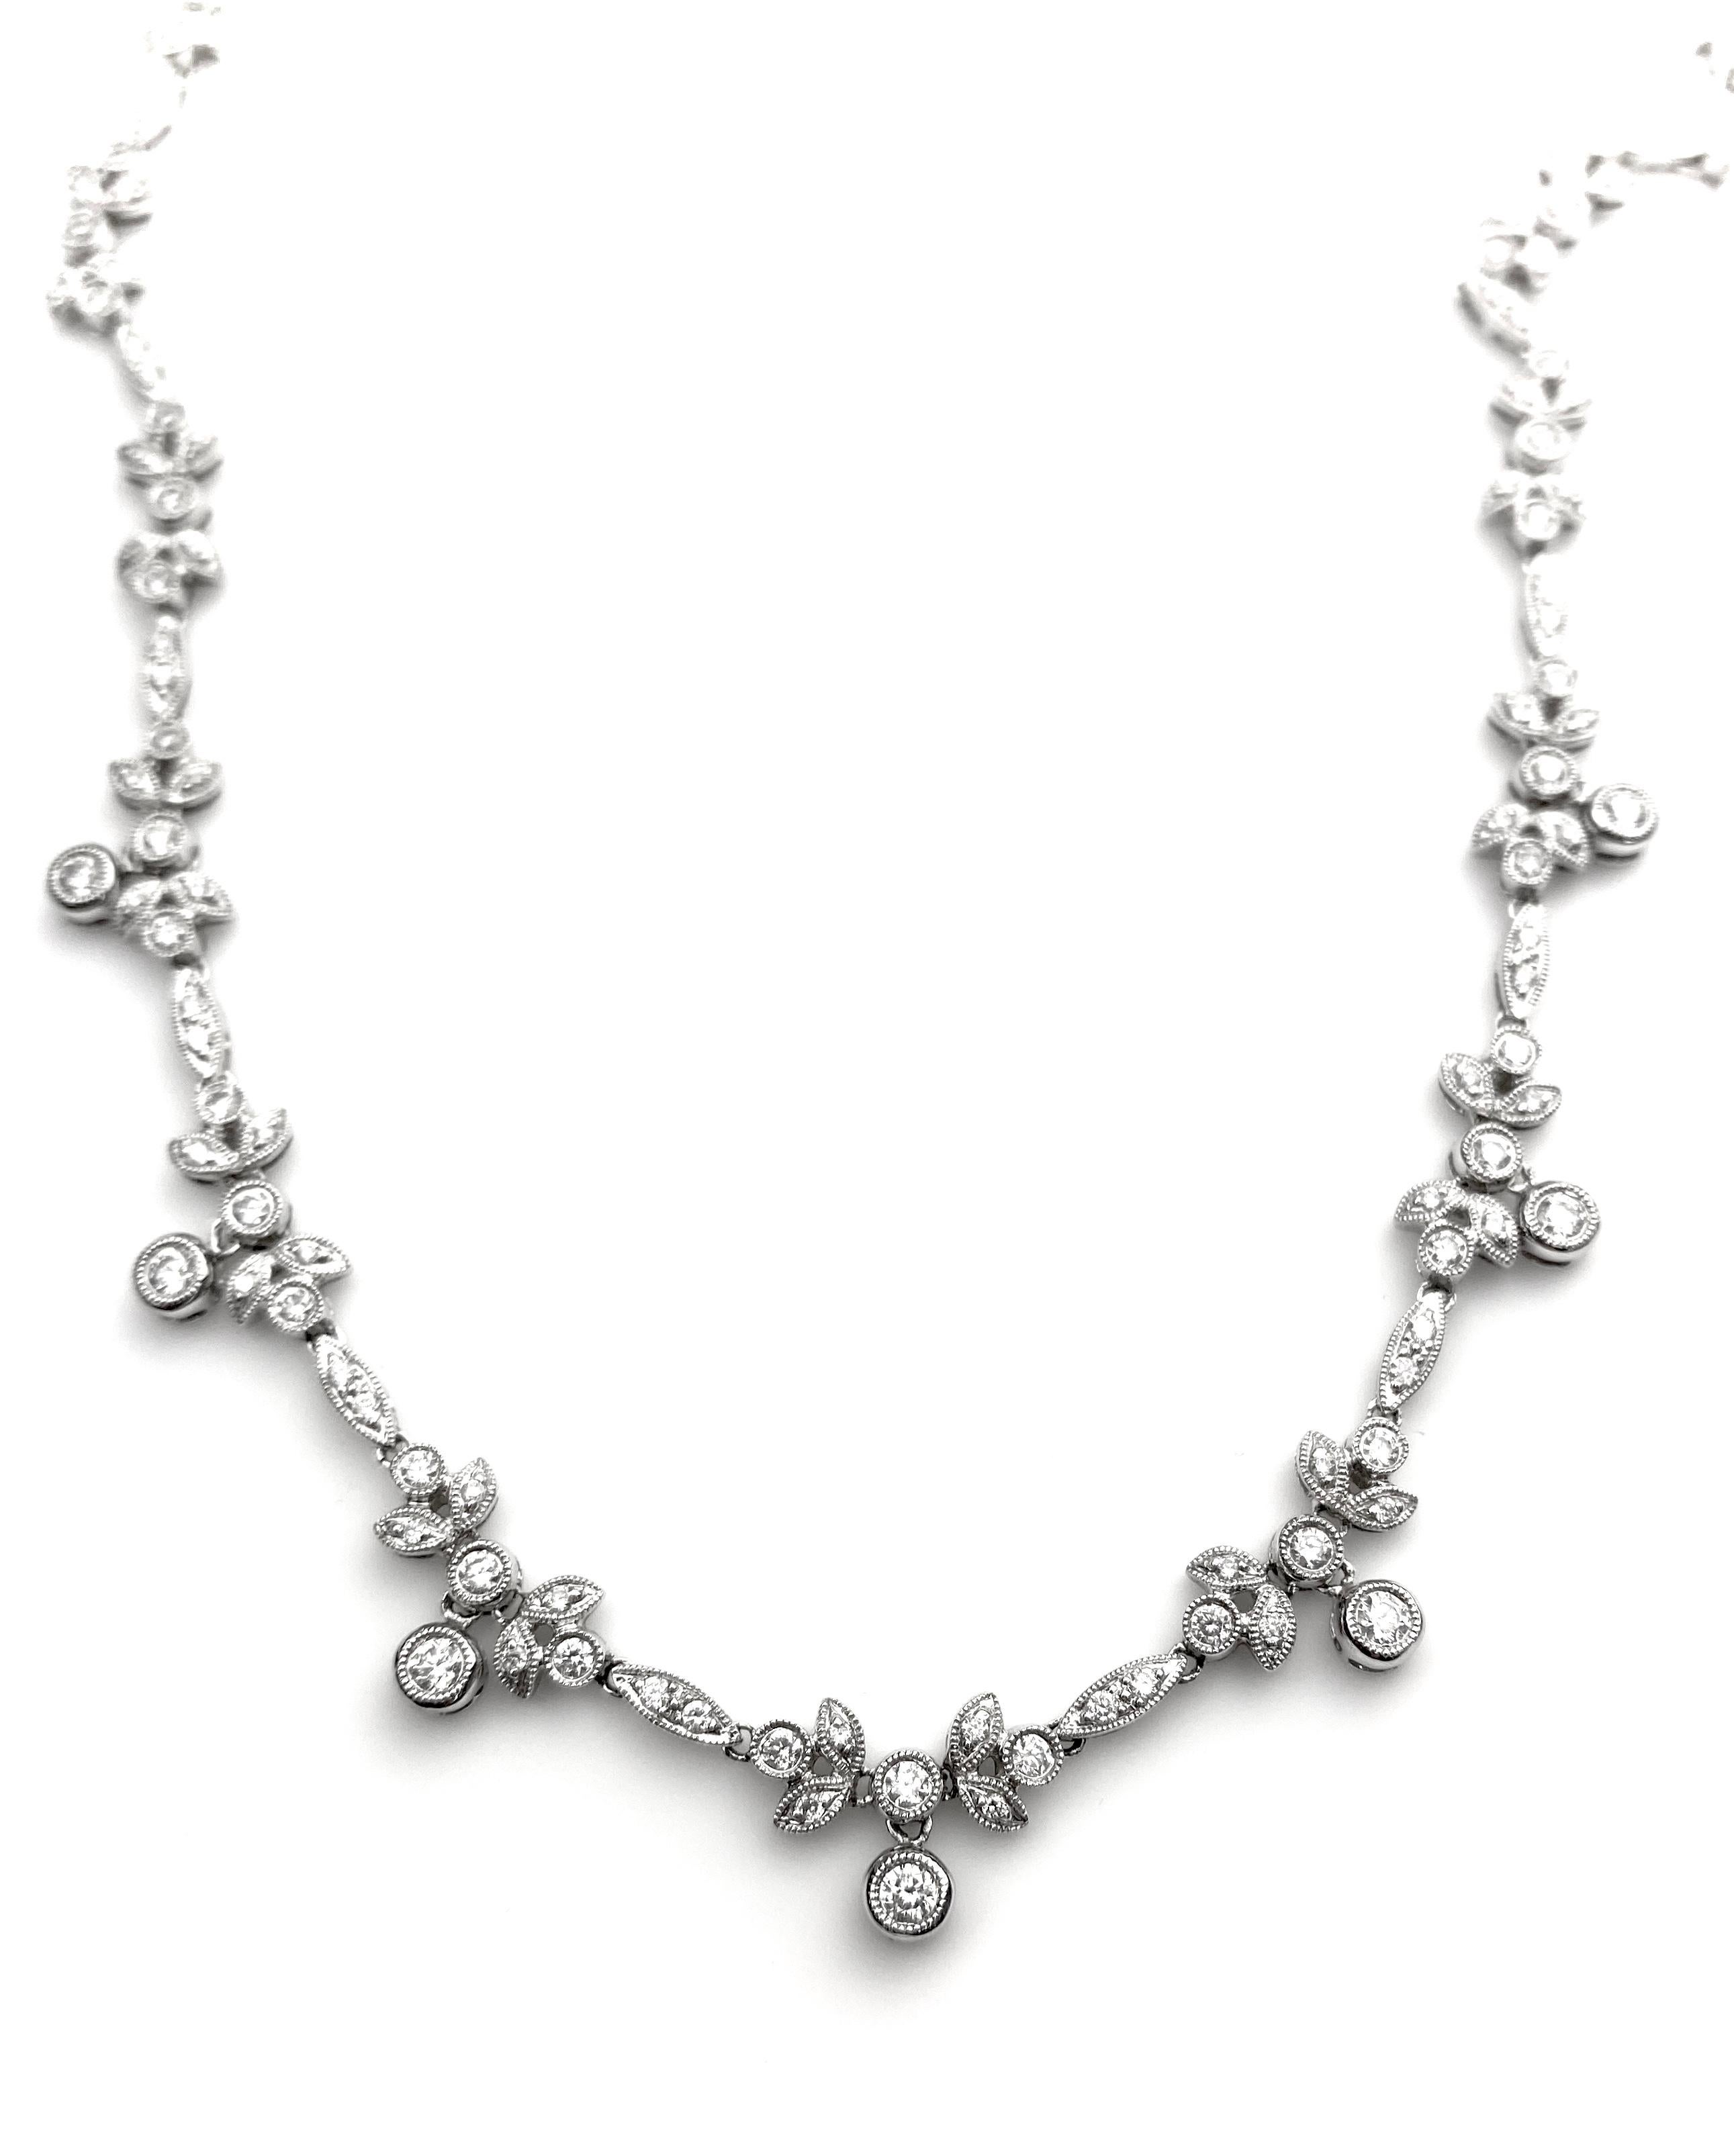 Ladies' laurel motif necklace in 18kt white gold micro-set with 104 diamonds equal to 1.74ct total.